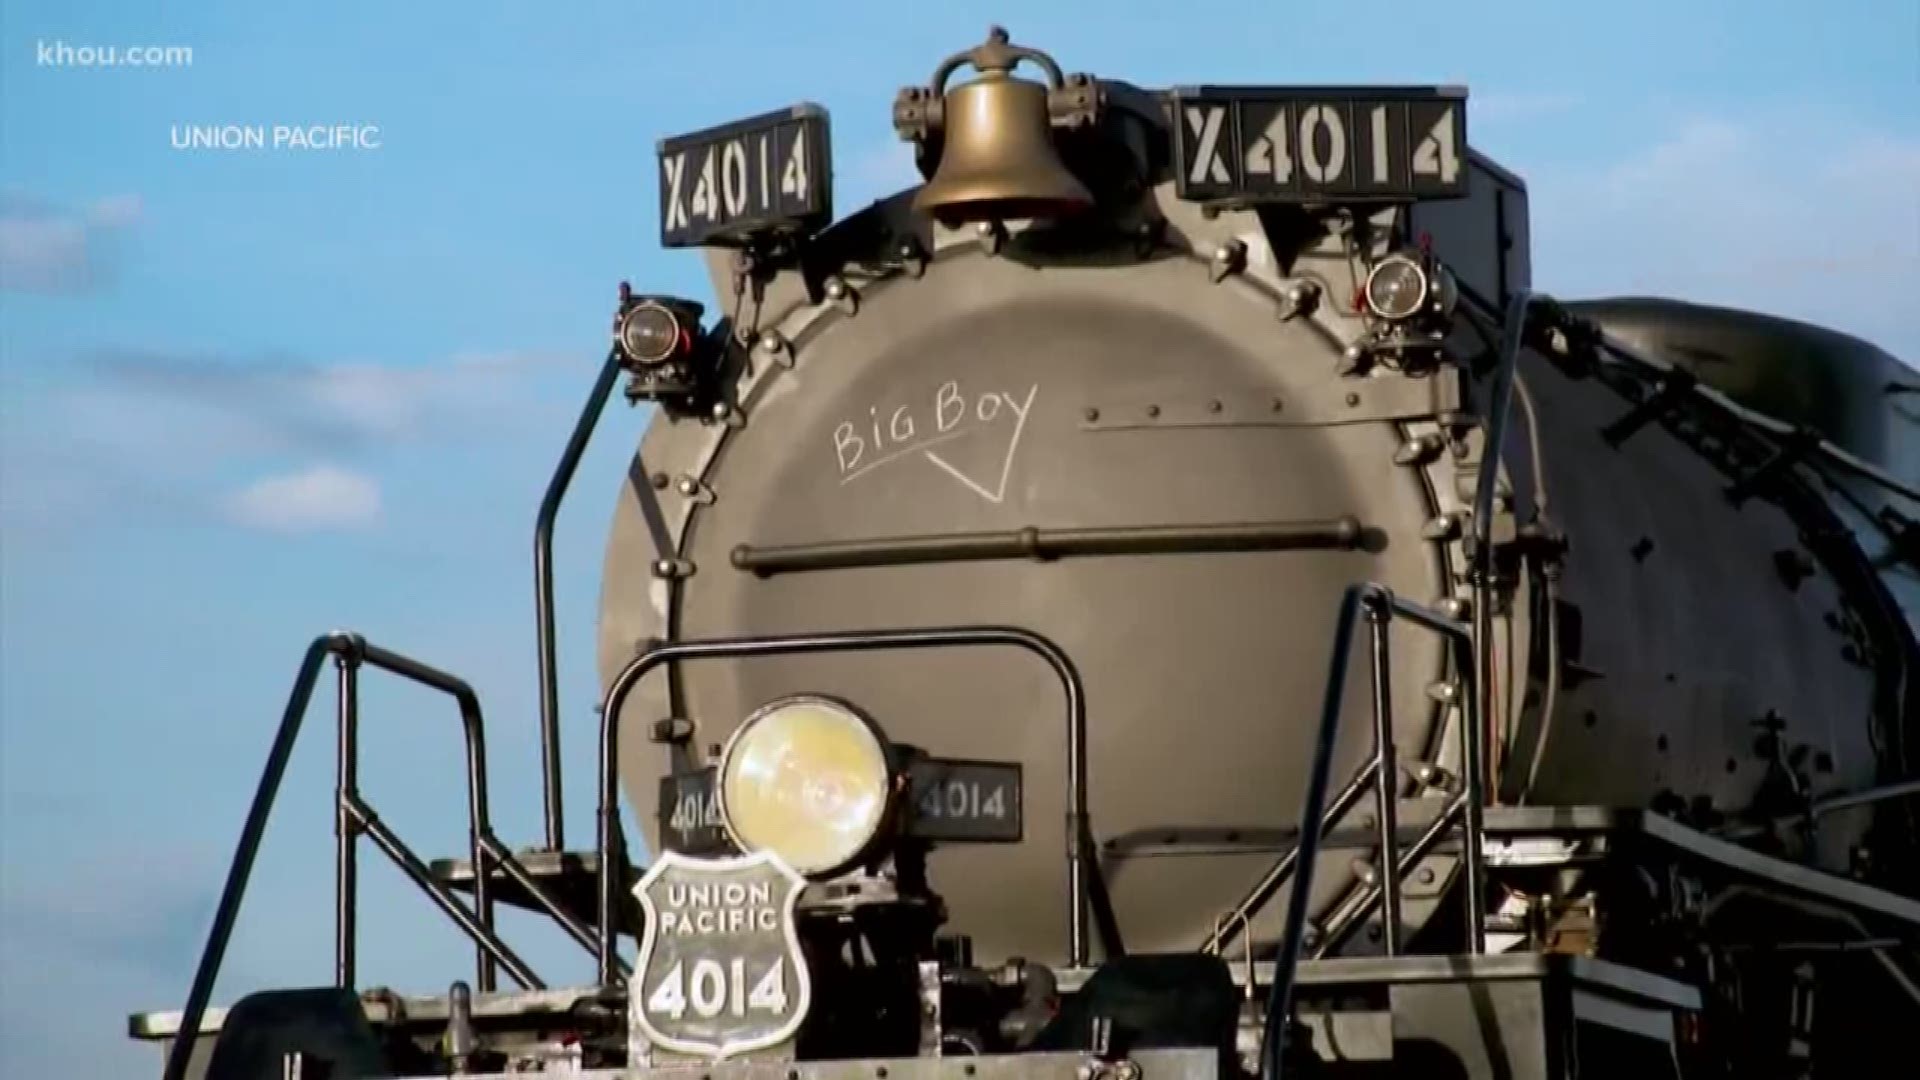 Union Pacific's Big Boy engine picked up a new passenger in Houston: the Bush 4141 train.